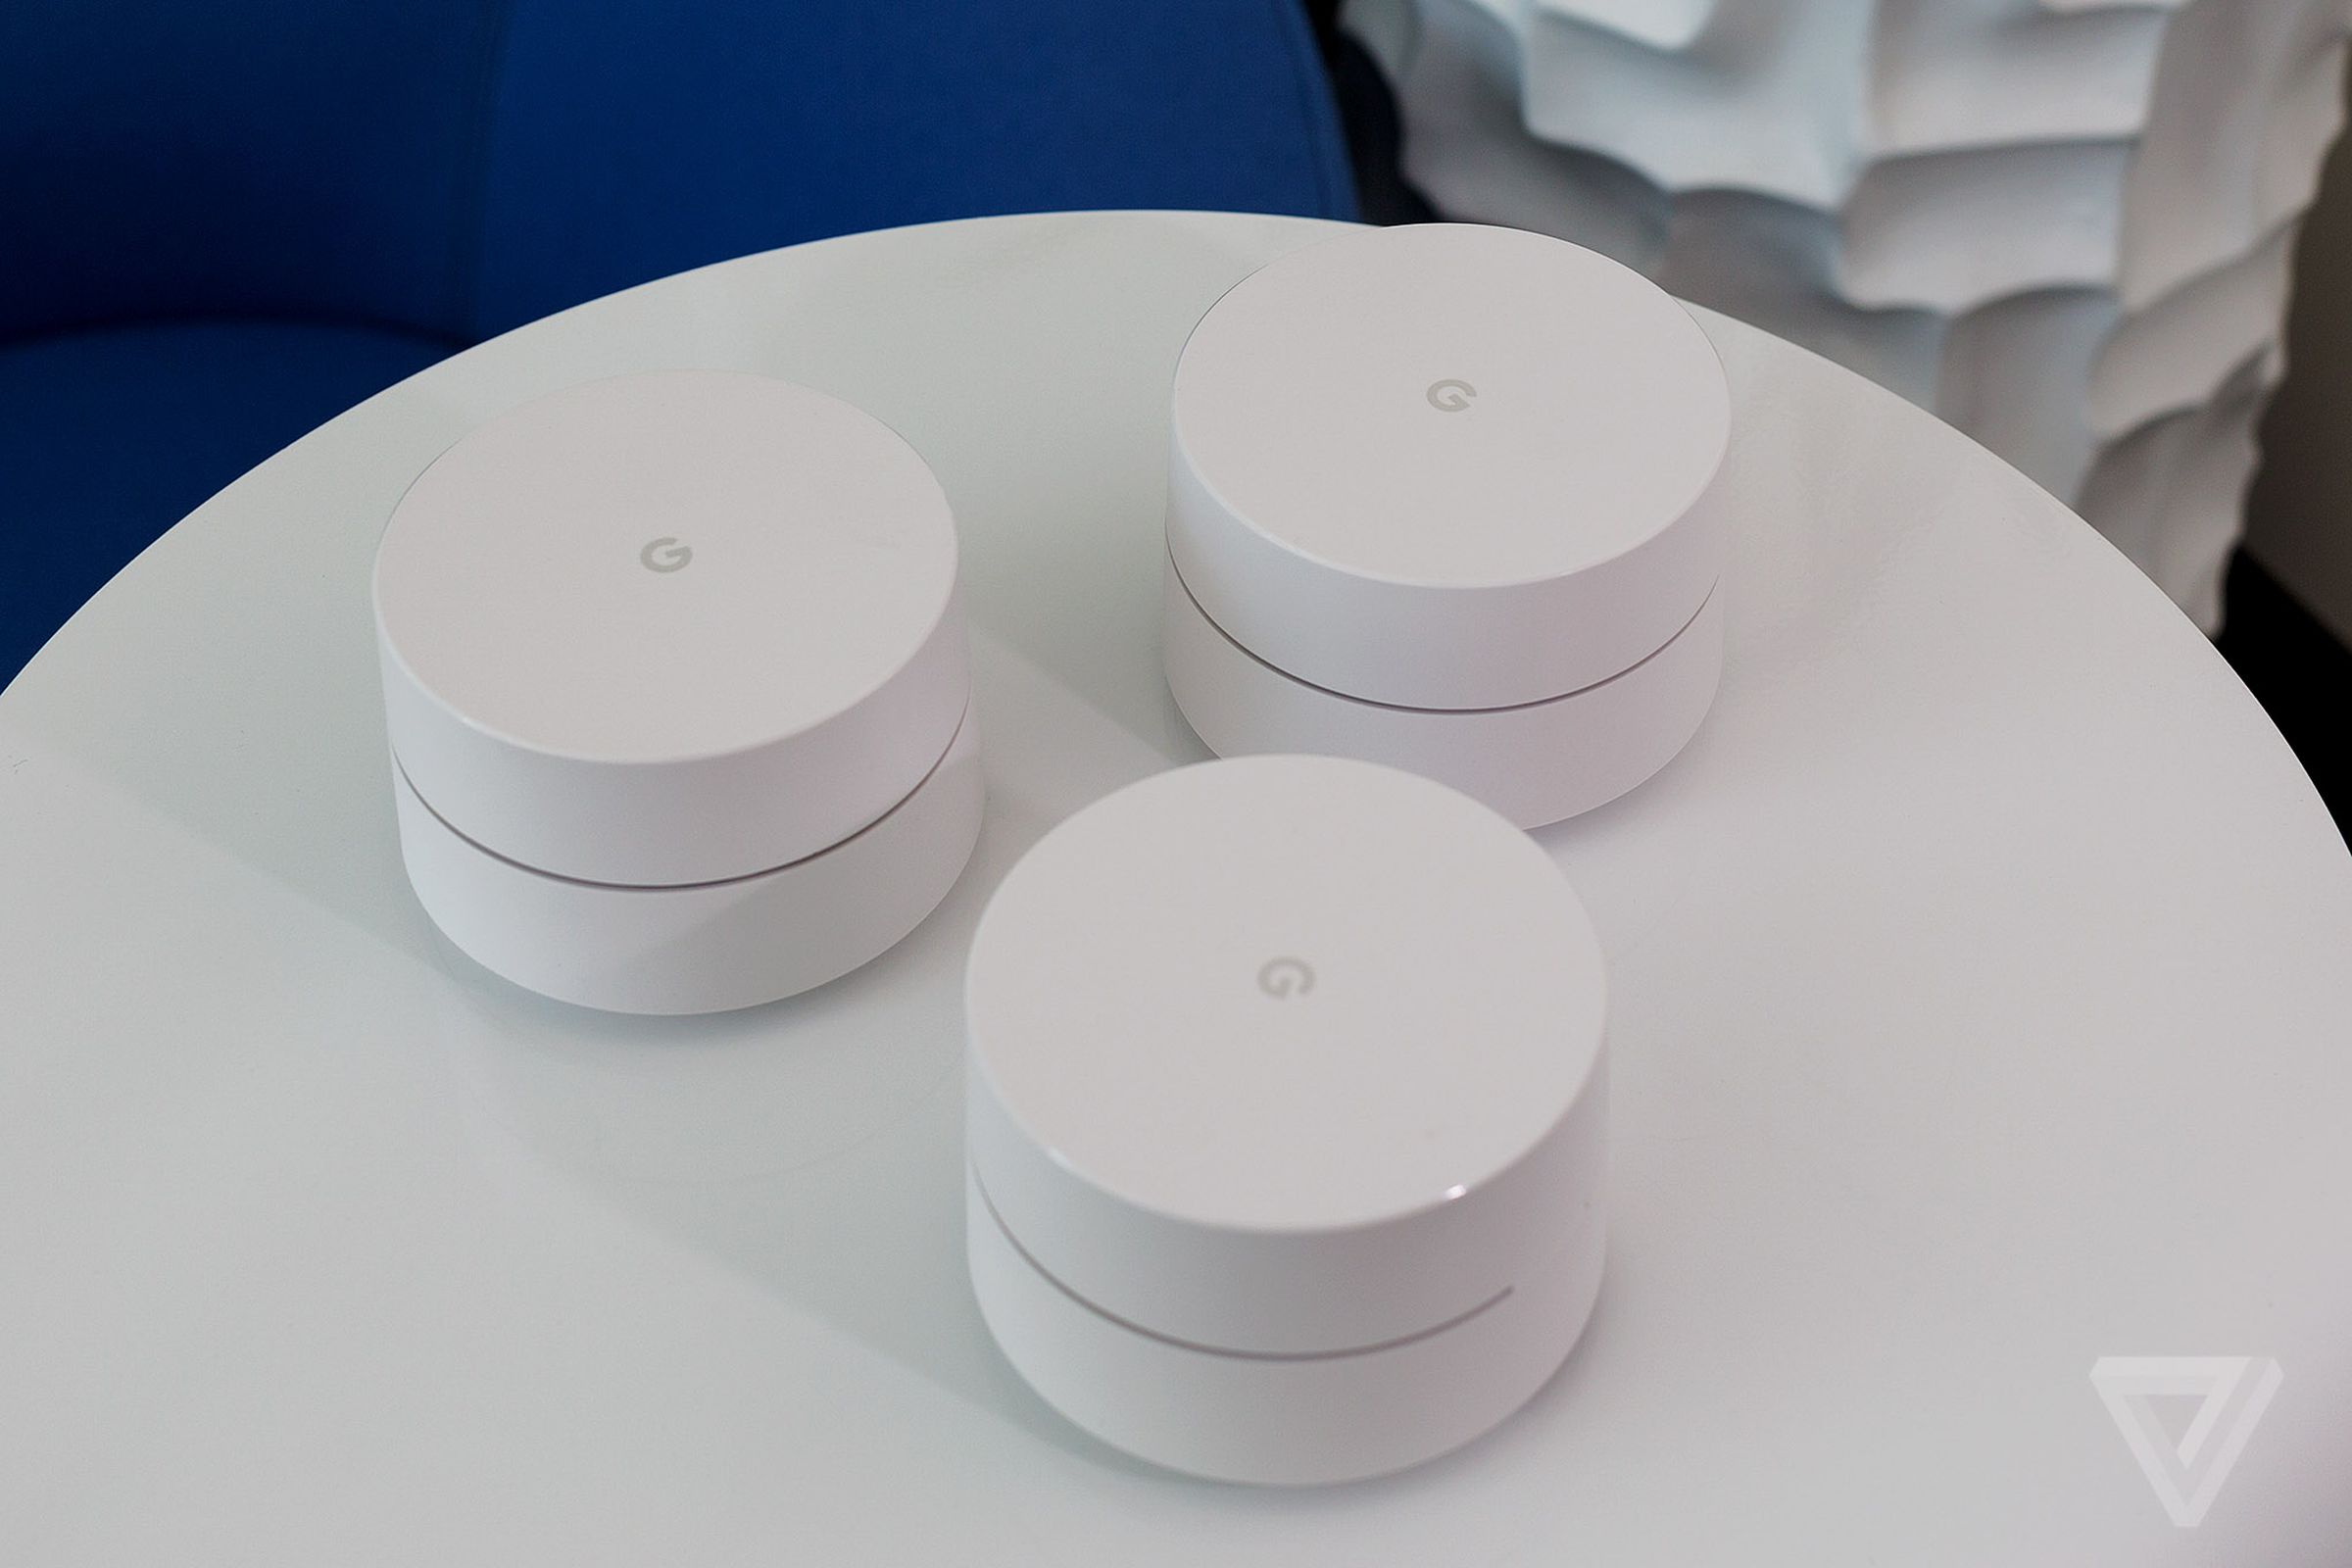 Google Wifi router